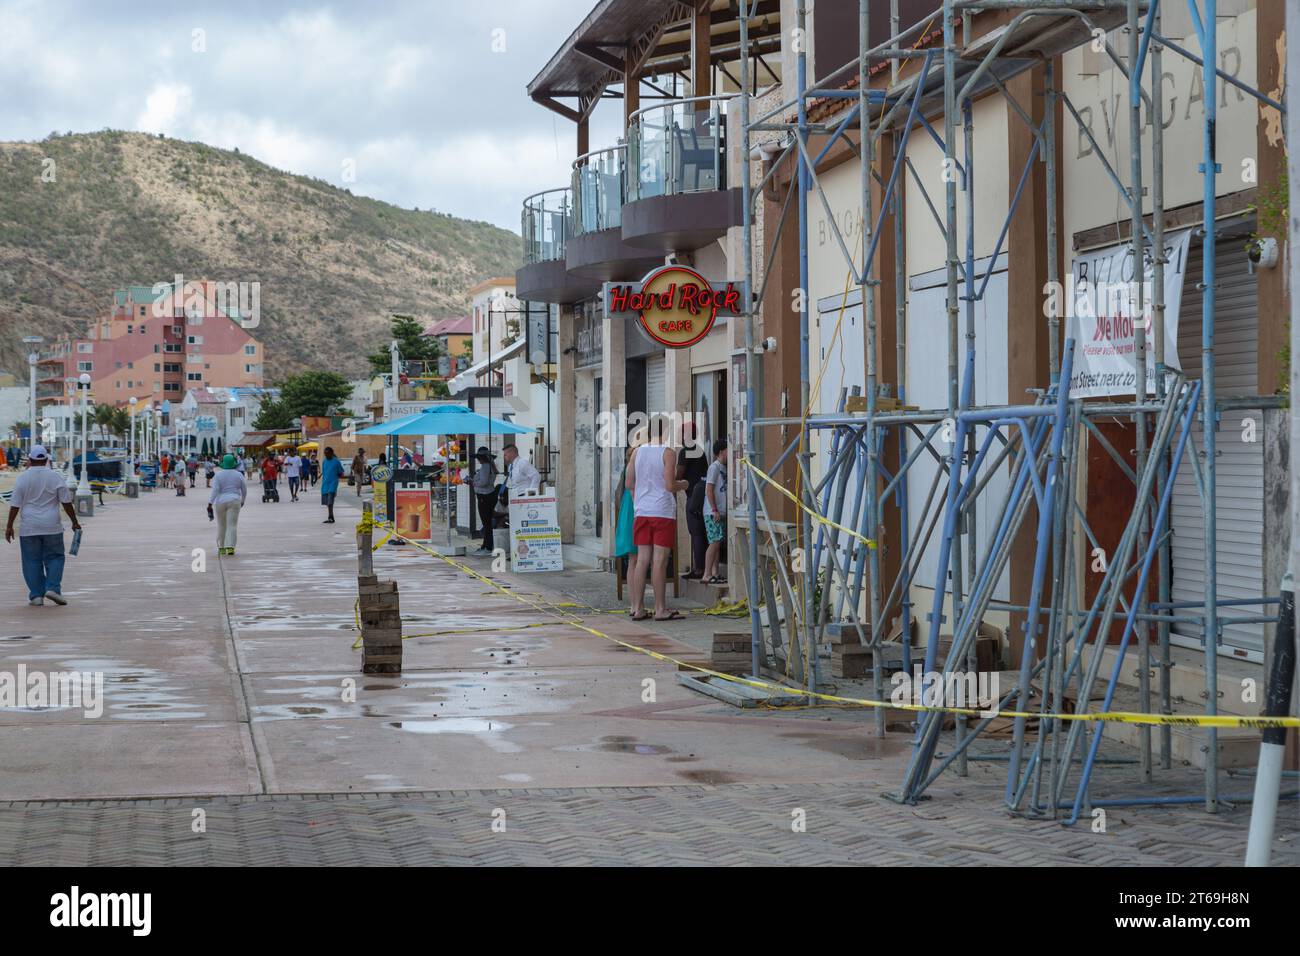 Tourists entering the Hard Rock Cafe along Boardwak at the port of Phillipsburg, St. Maarten in the Caribbean Stock Photo